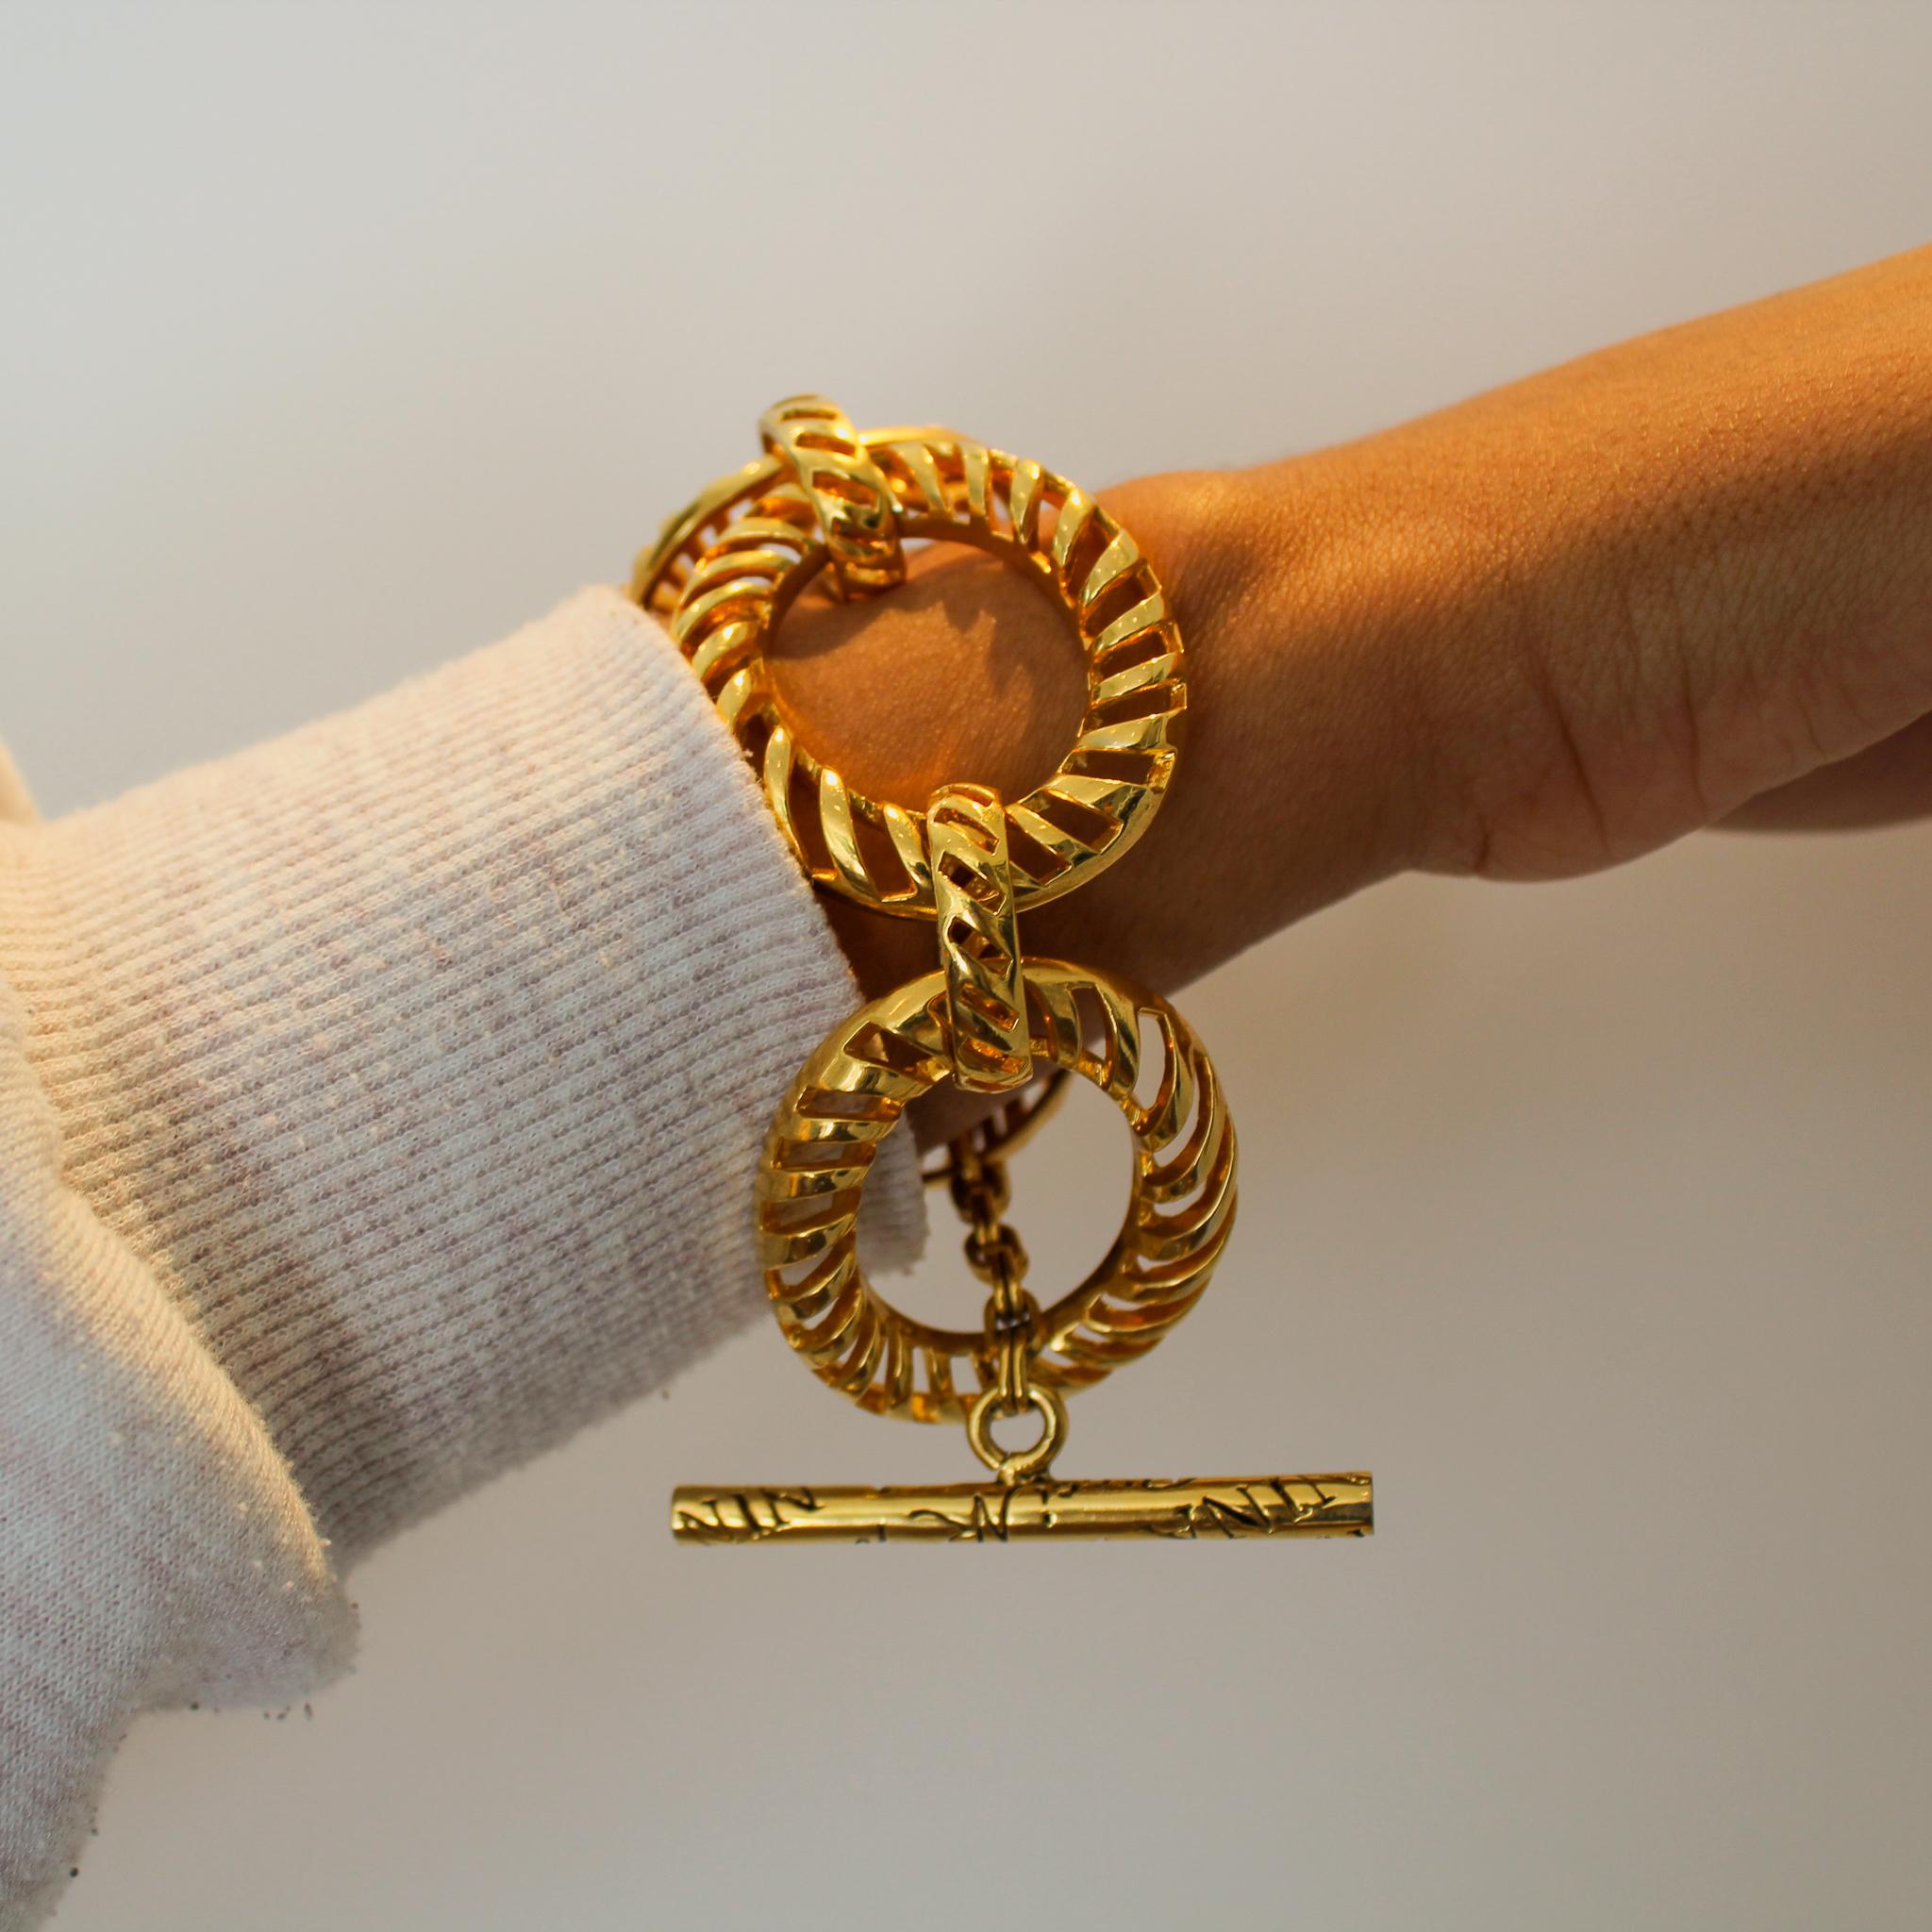 Nina Ricci Vintage 1980s Bracelet

A beautiful statement link bracelet from legendary French designer, Nina Ricci. Made in France in the late 80s, this incredible bracelet is crafted from an open work gold plated metal and engraved with Nina Ricci